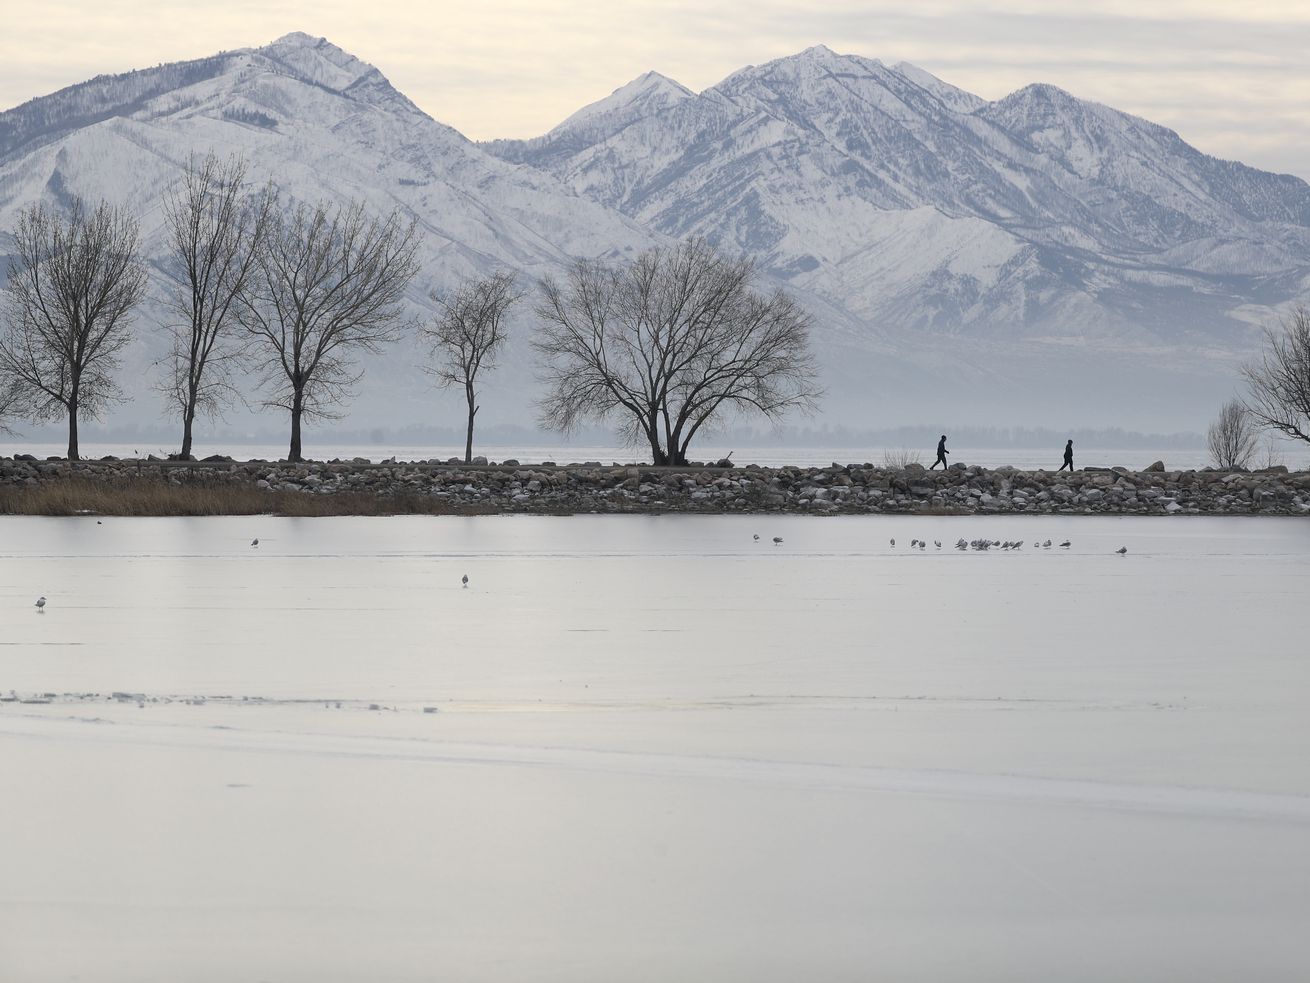 People walk on a jetty in Utah Lake State Park in Provo on Thursday, Jan. 13, 2022. Stakeholders gathered at Utah Valley University this week to discuss the future of the lake, including scientists, lawmakers, government officials and the public.